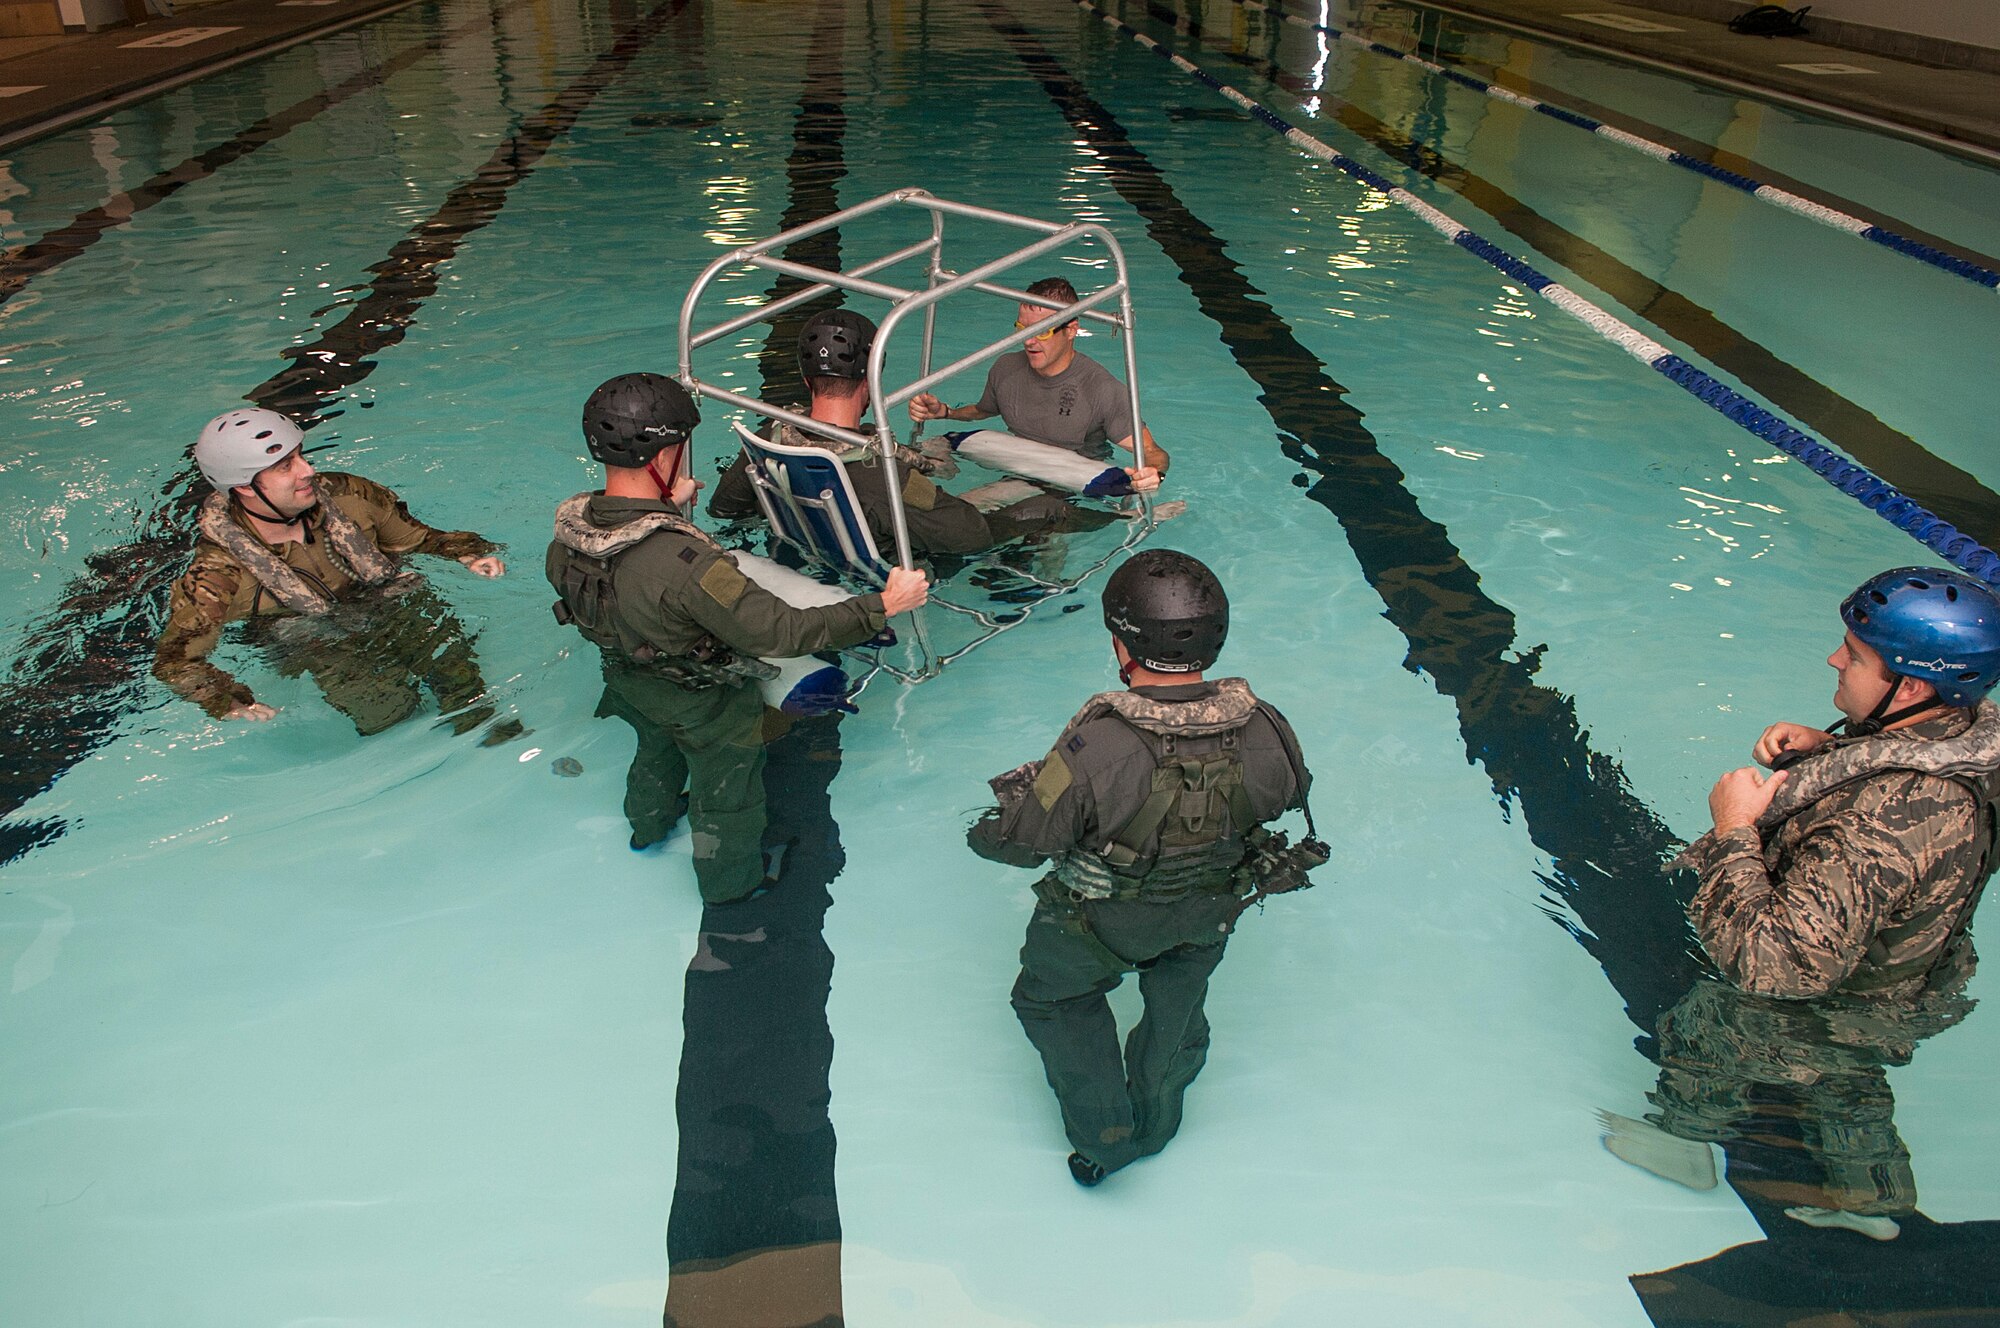 Members of the 54th Helicopter Squadron go through underwater egress survival training at Minot Air Force Base, N.D., June 22, 2017. The shallow water egress trainer allows Airmen to practice escape procedures during a simulated helicopter crash. (U.S. Air Force photo by Airman 1st Class Jonathan McElderry)